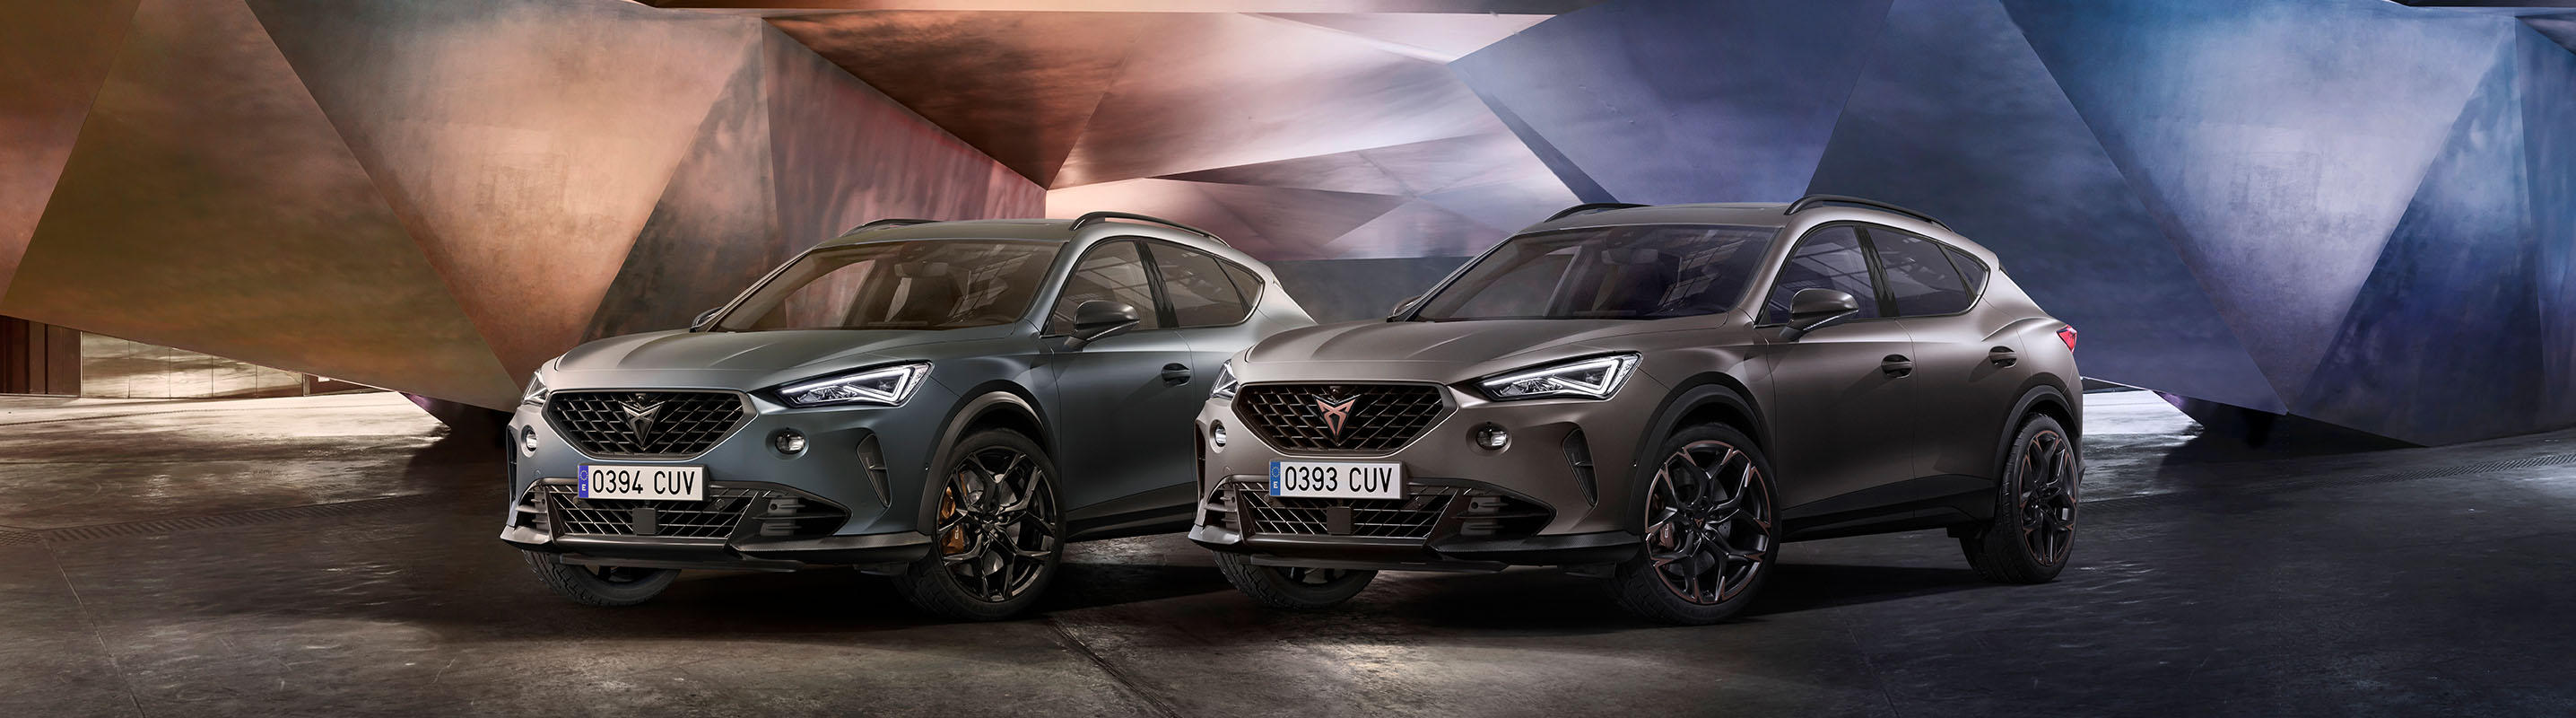 CUPRA Formentor VZ5 models in Century Bronze and Enceladus Grey – Special Limited Editions